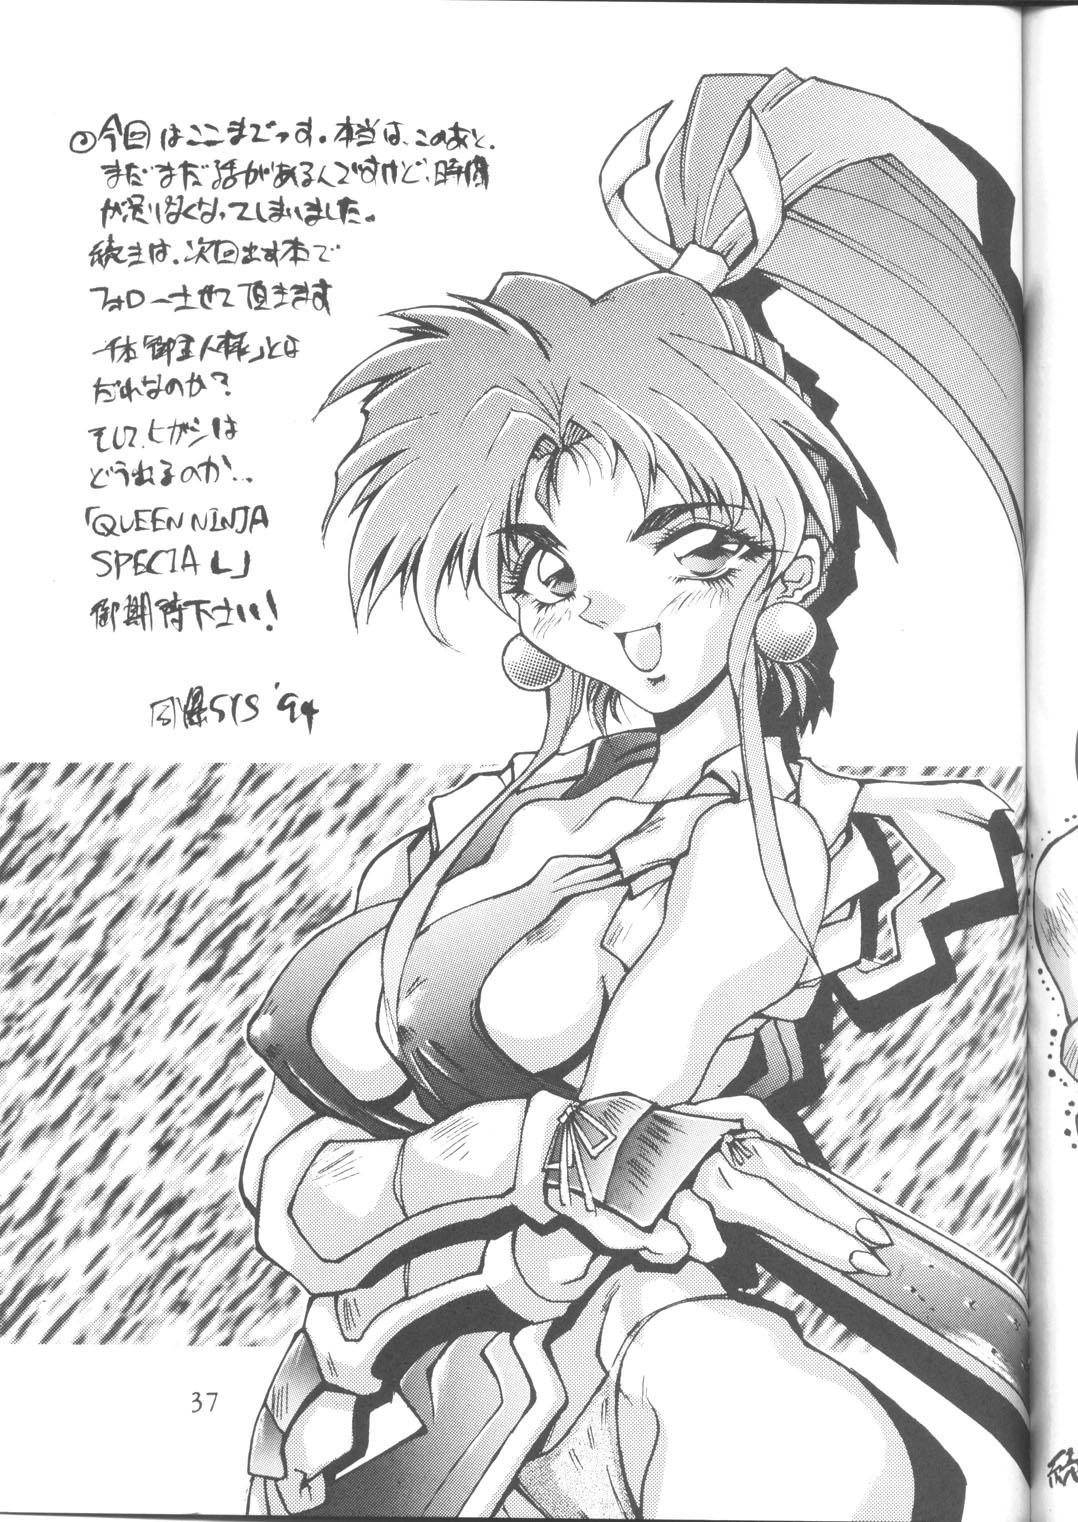 Topless Queen Ninja 2 - King of fighters Woman - Page 36